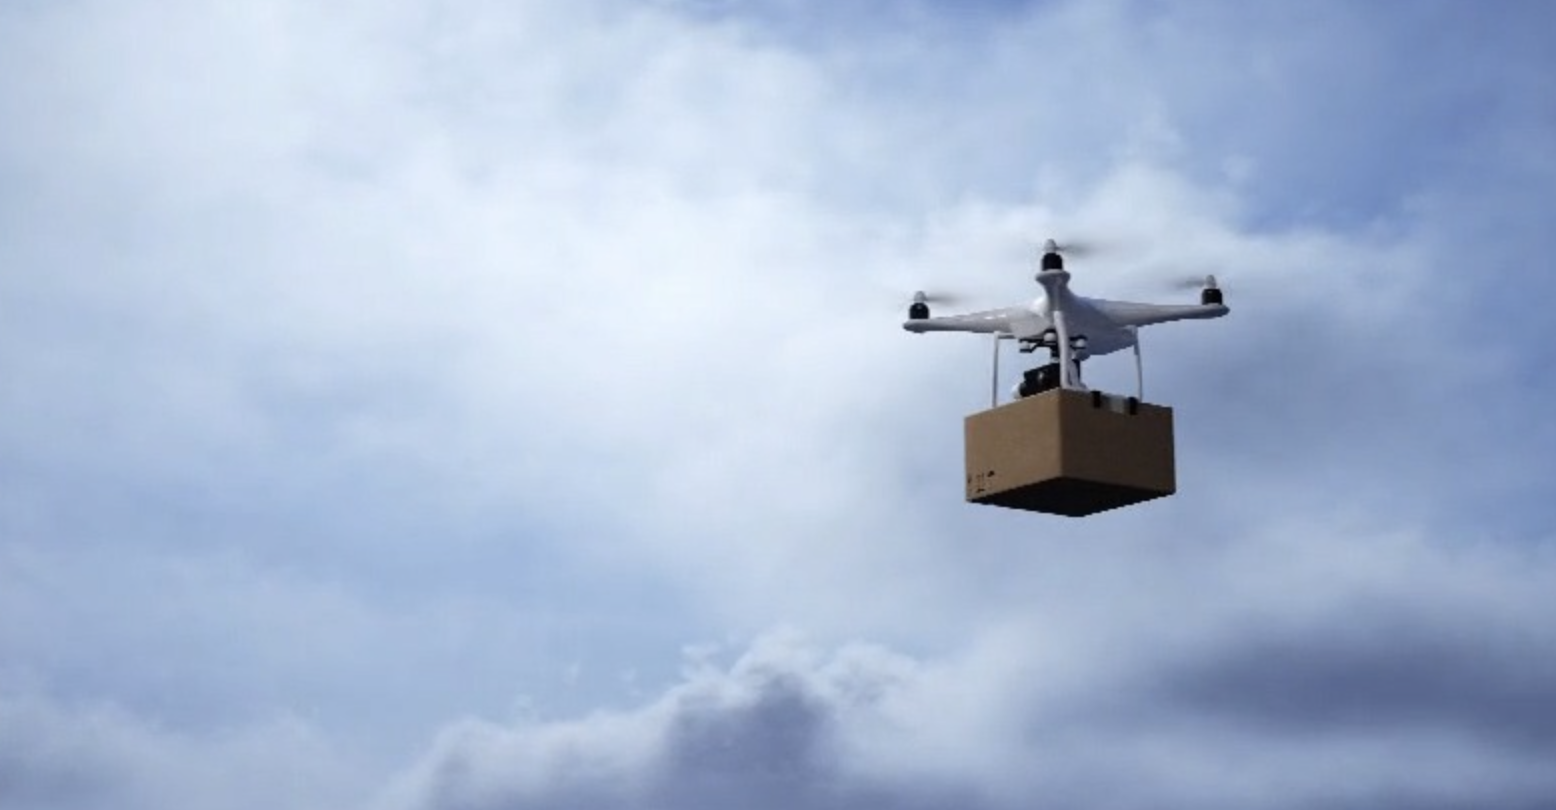 Script Runner launches Canada’s first AI-powered drone delivery service, revolutionizing healthcare access for remote communities